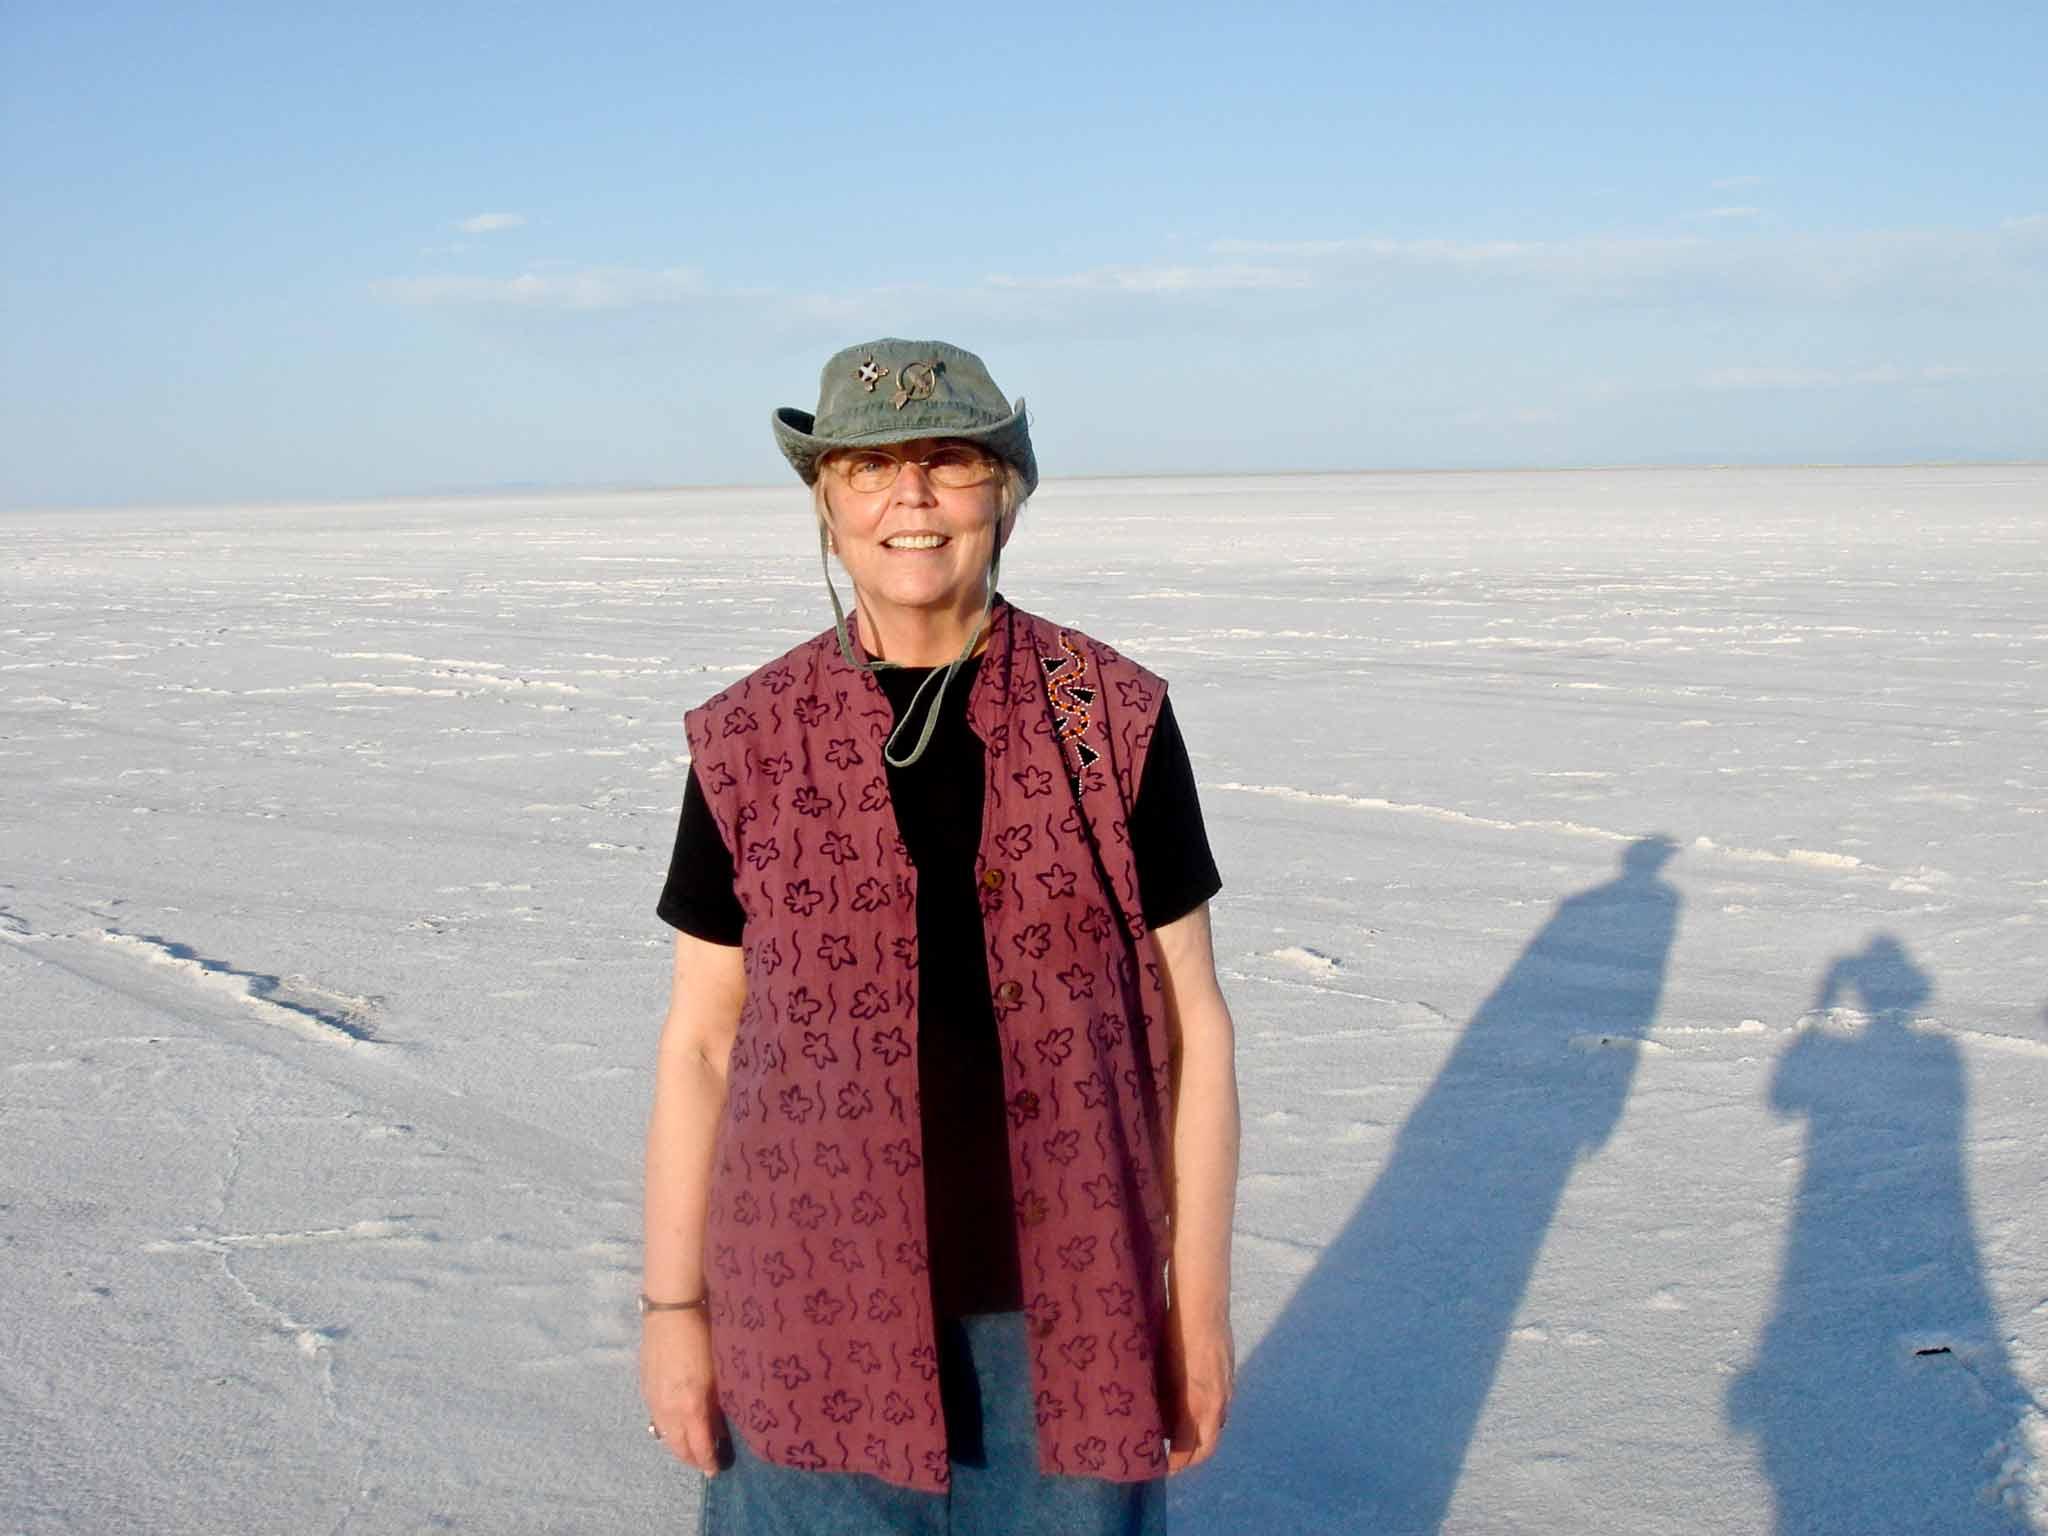 Nancy Holt stranding alone with the Salt Flats of Utah in the background.